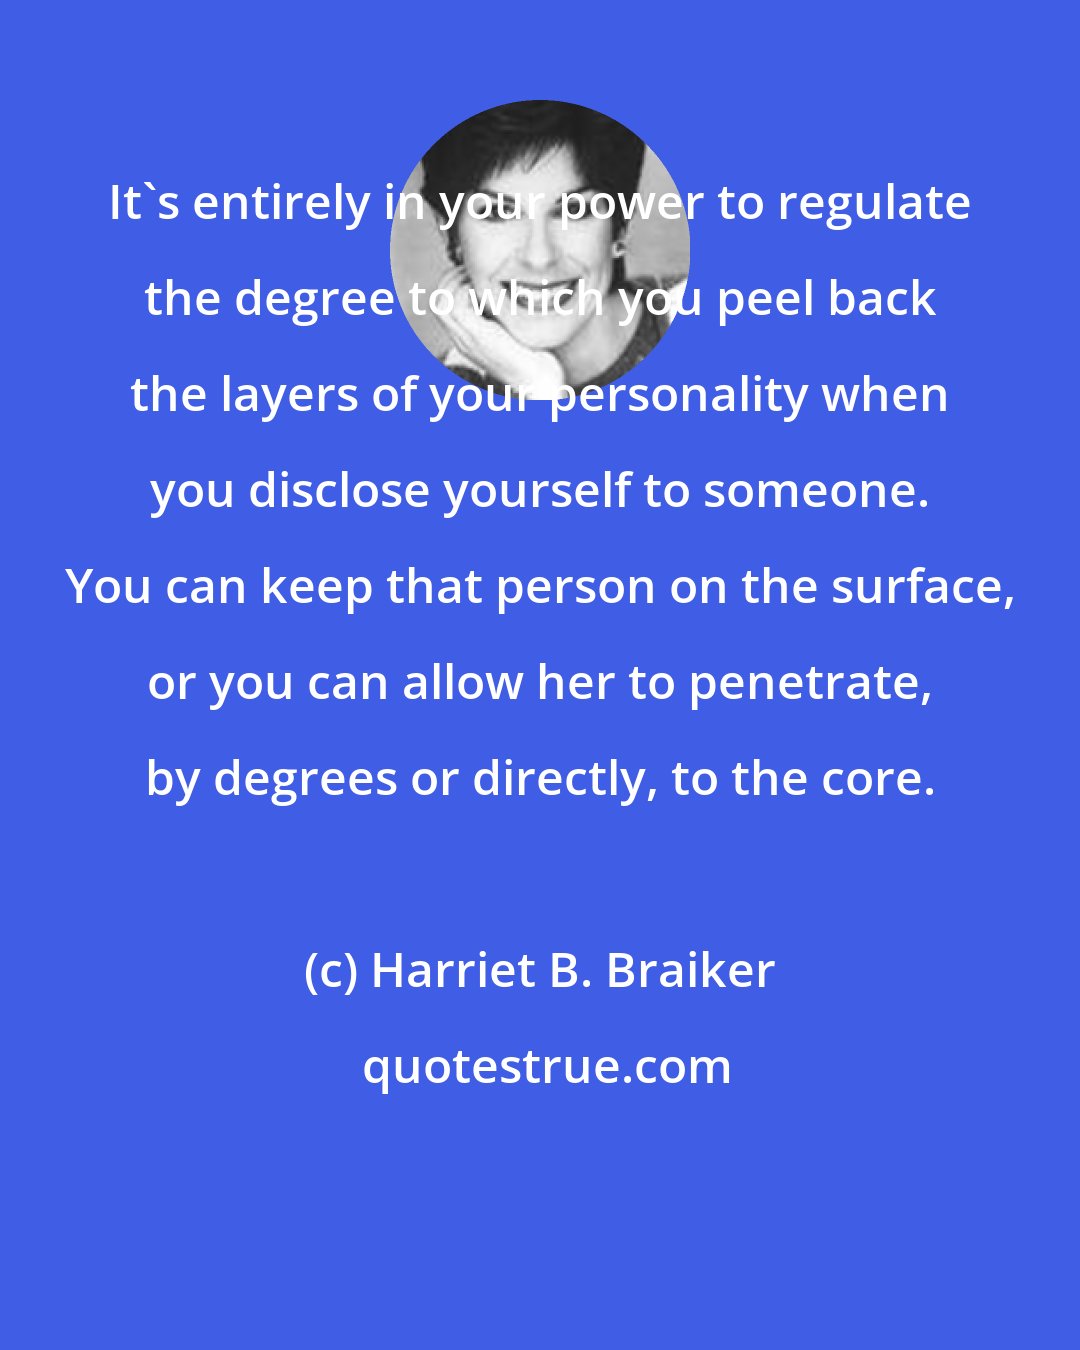 Harriet B. Braiker: It's entirely in your power to regulate the degree to which you peel back the layers of your personality when you disclose yourself to someone. You can keep that person on the surface, or you can allow her to penetrate, by degrees or directly, to the core.